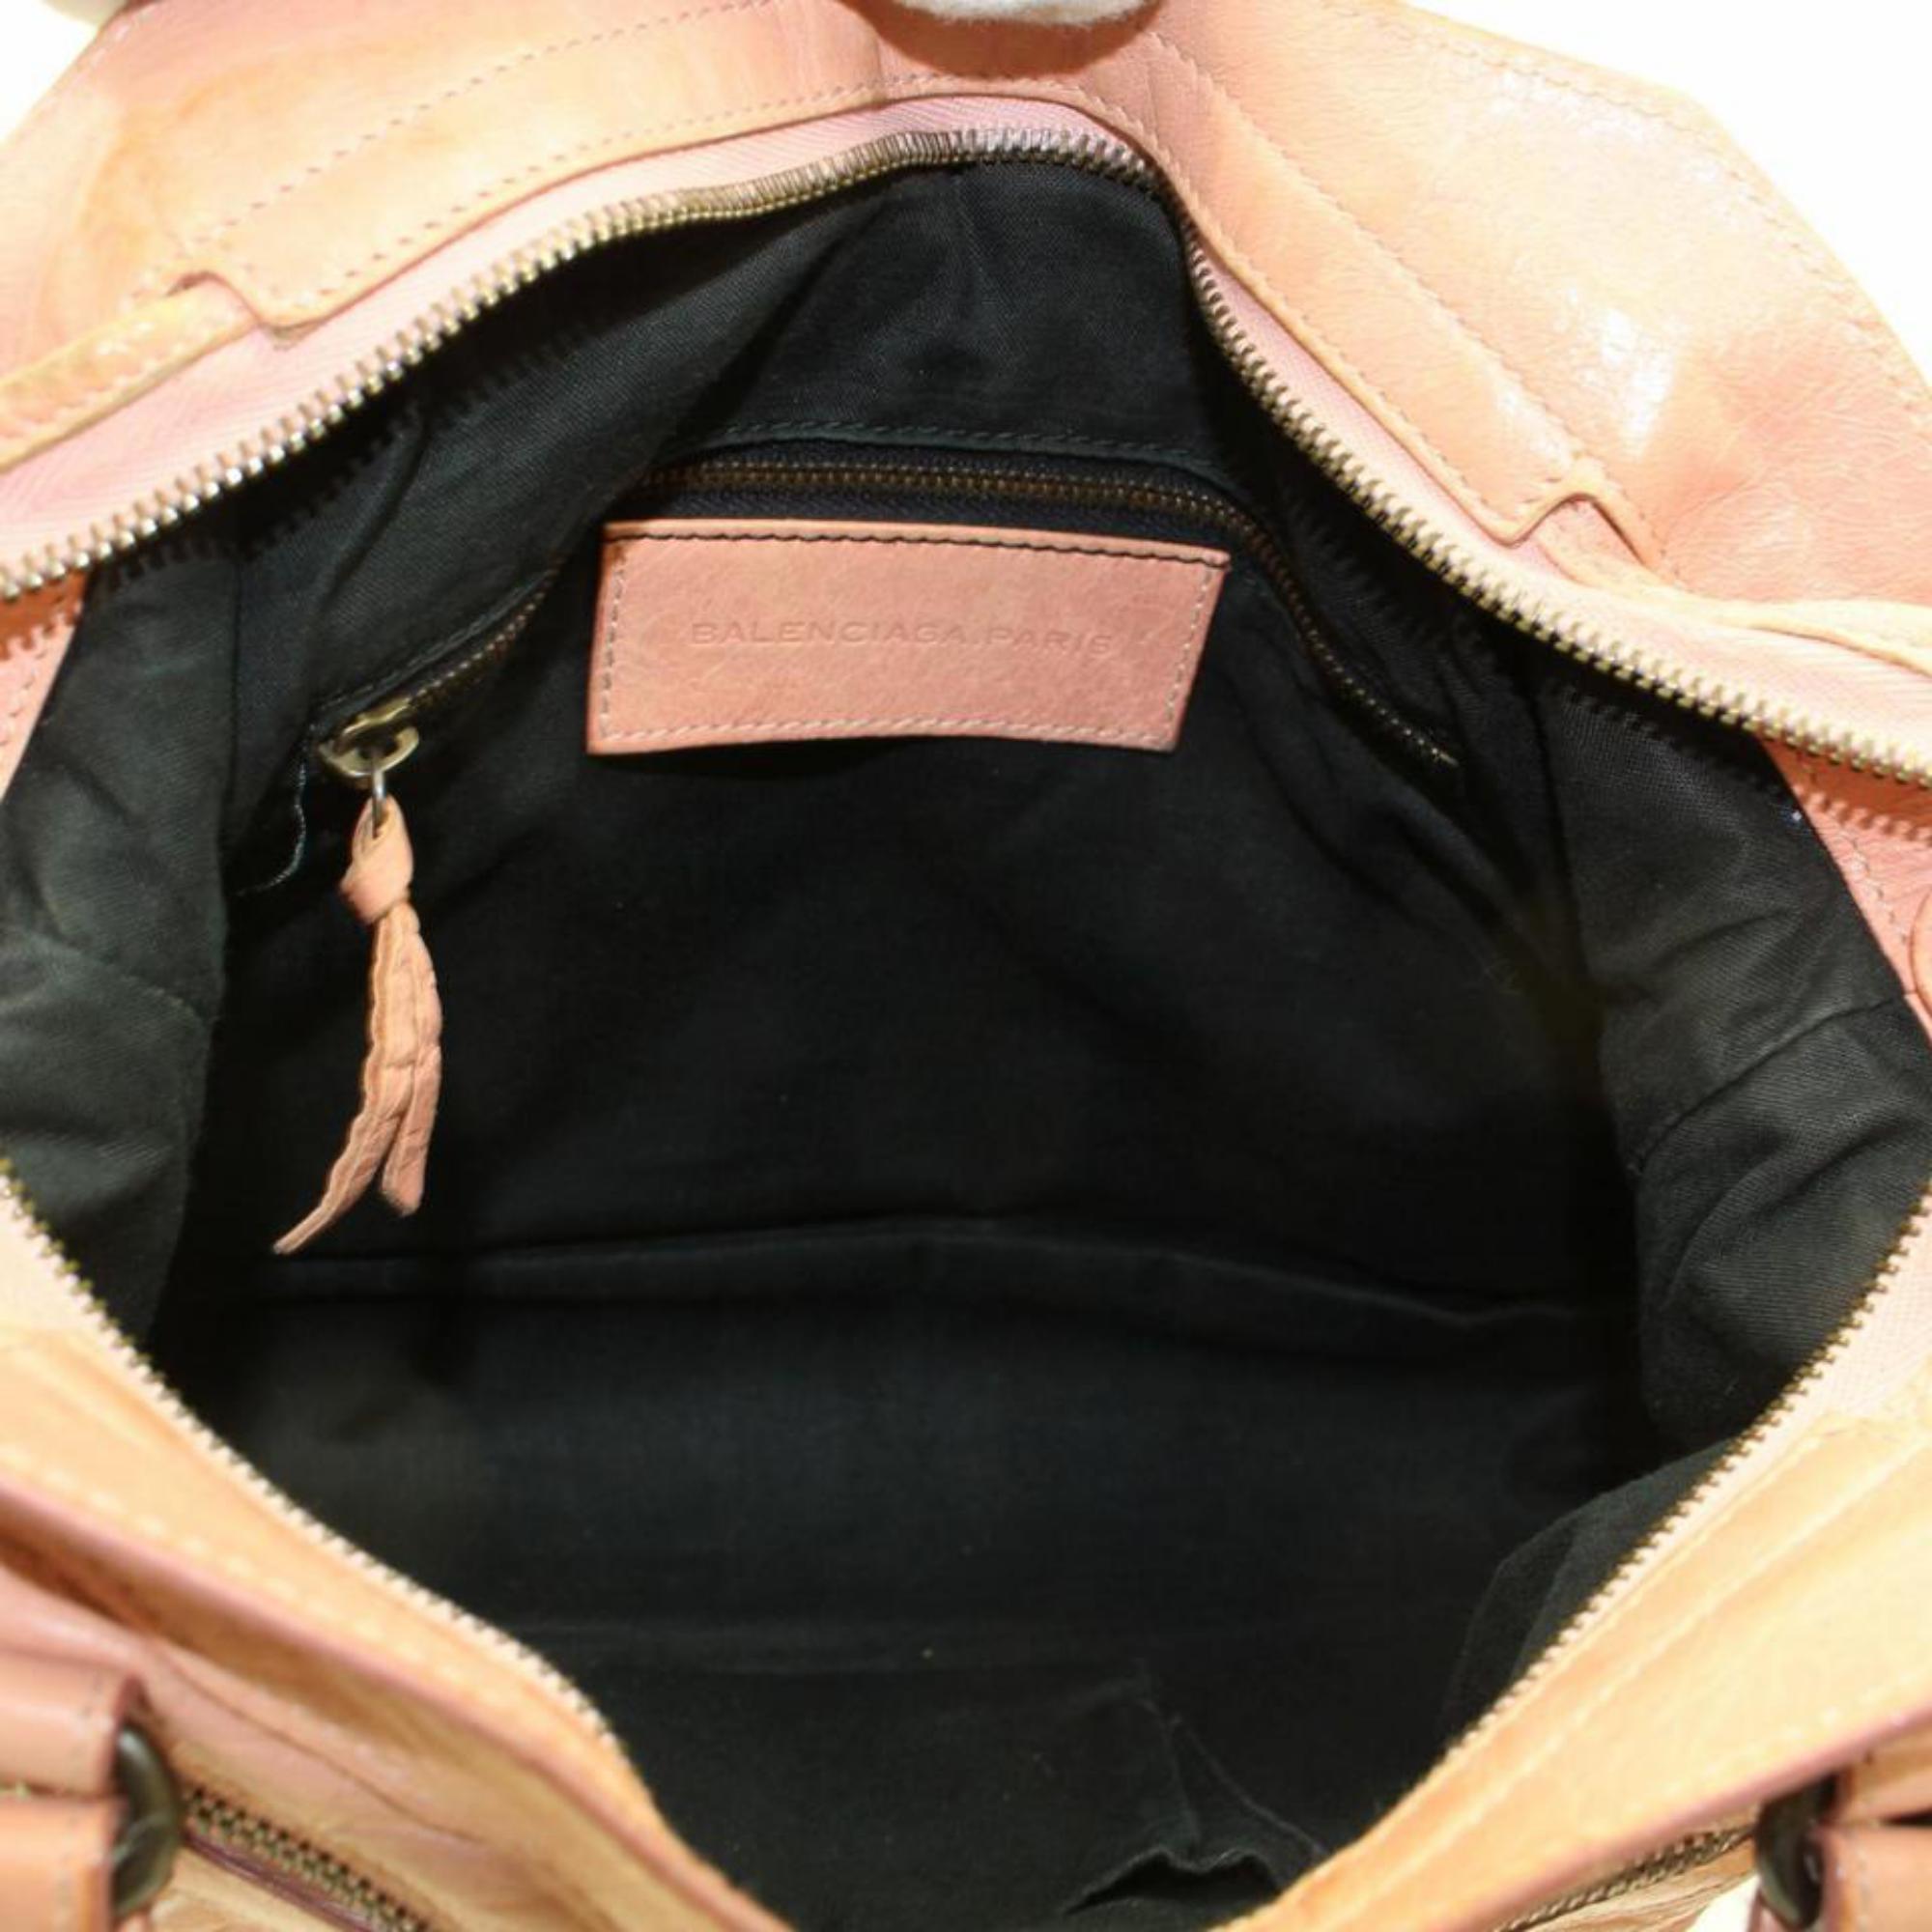 Balenciaga The Town 2way 865676 Pink Leather Shoulder Bag In Good Condition For Sale In Forest Hills, NY